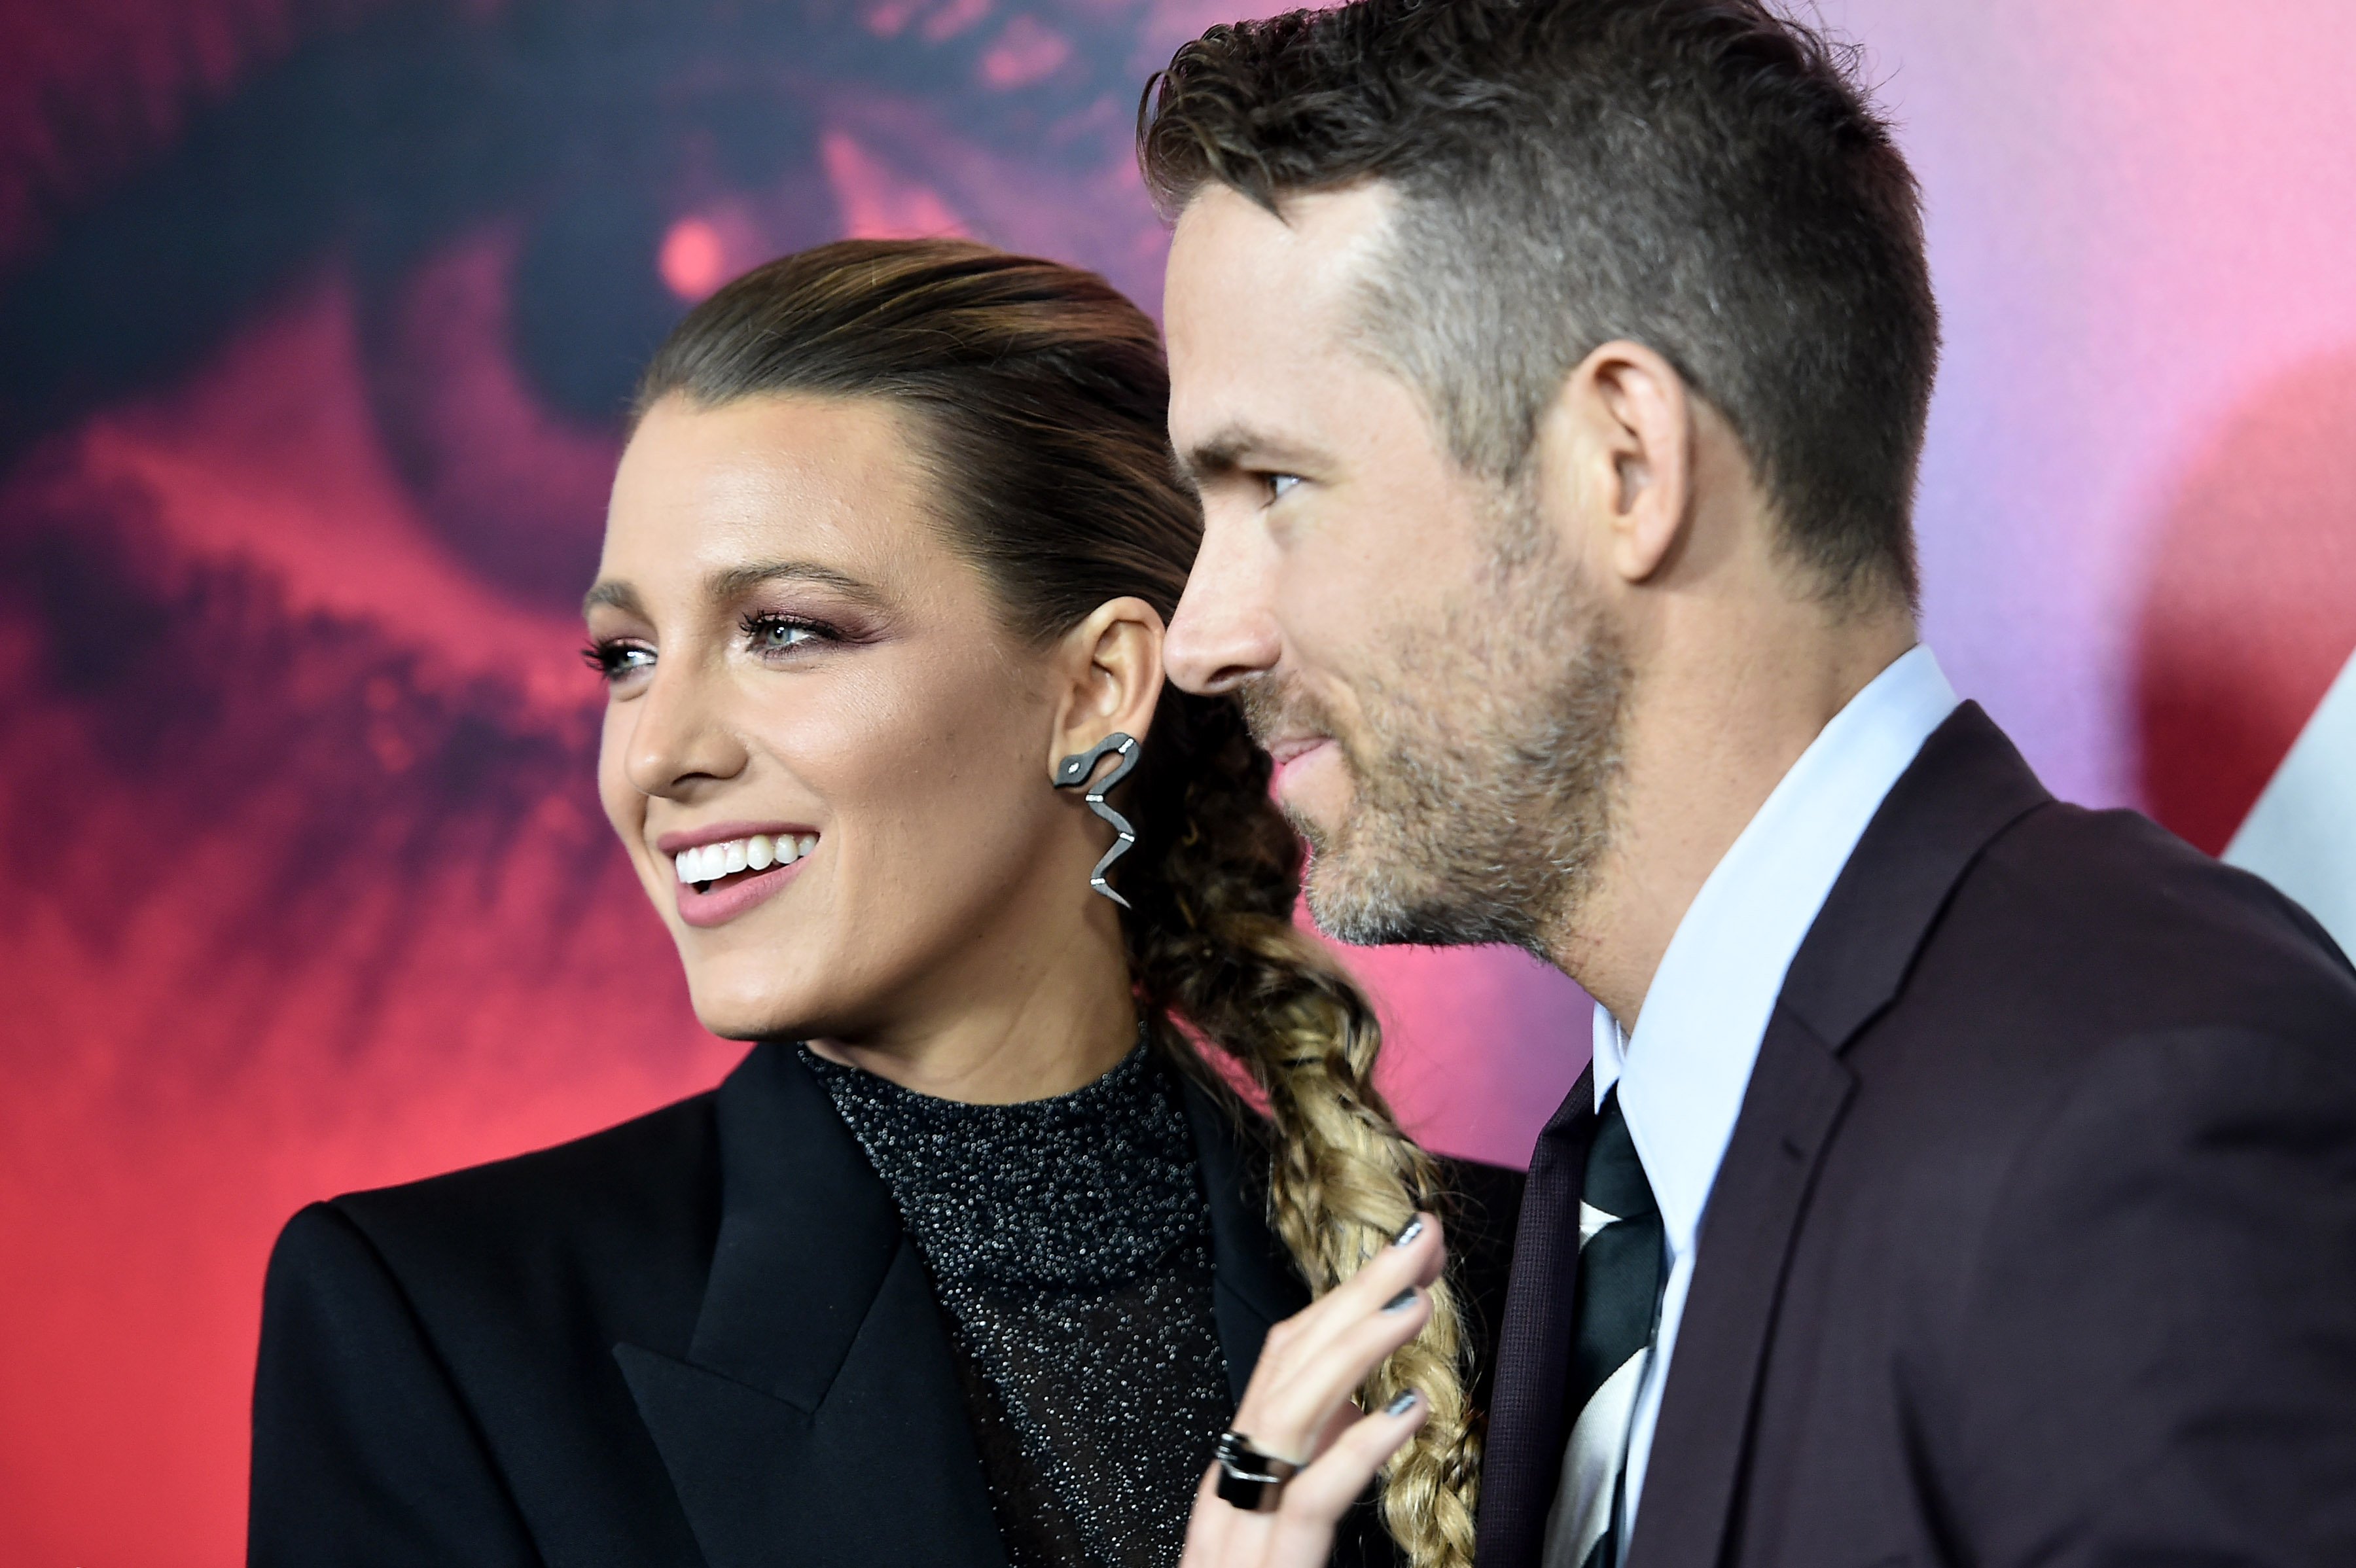 Blake Lively and Ryan Reynolds smile at the 'A Simple Favor' premiere.